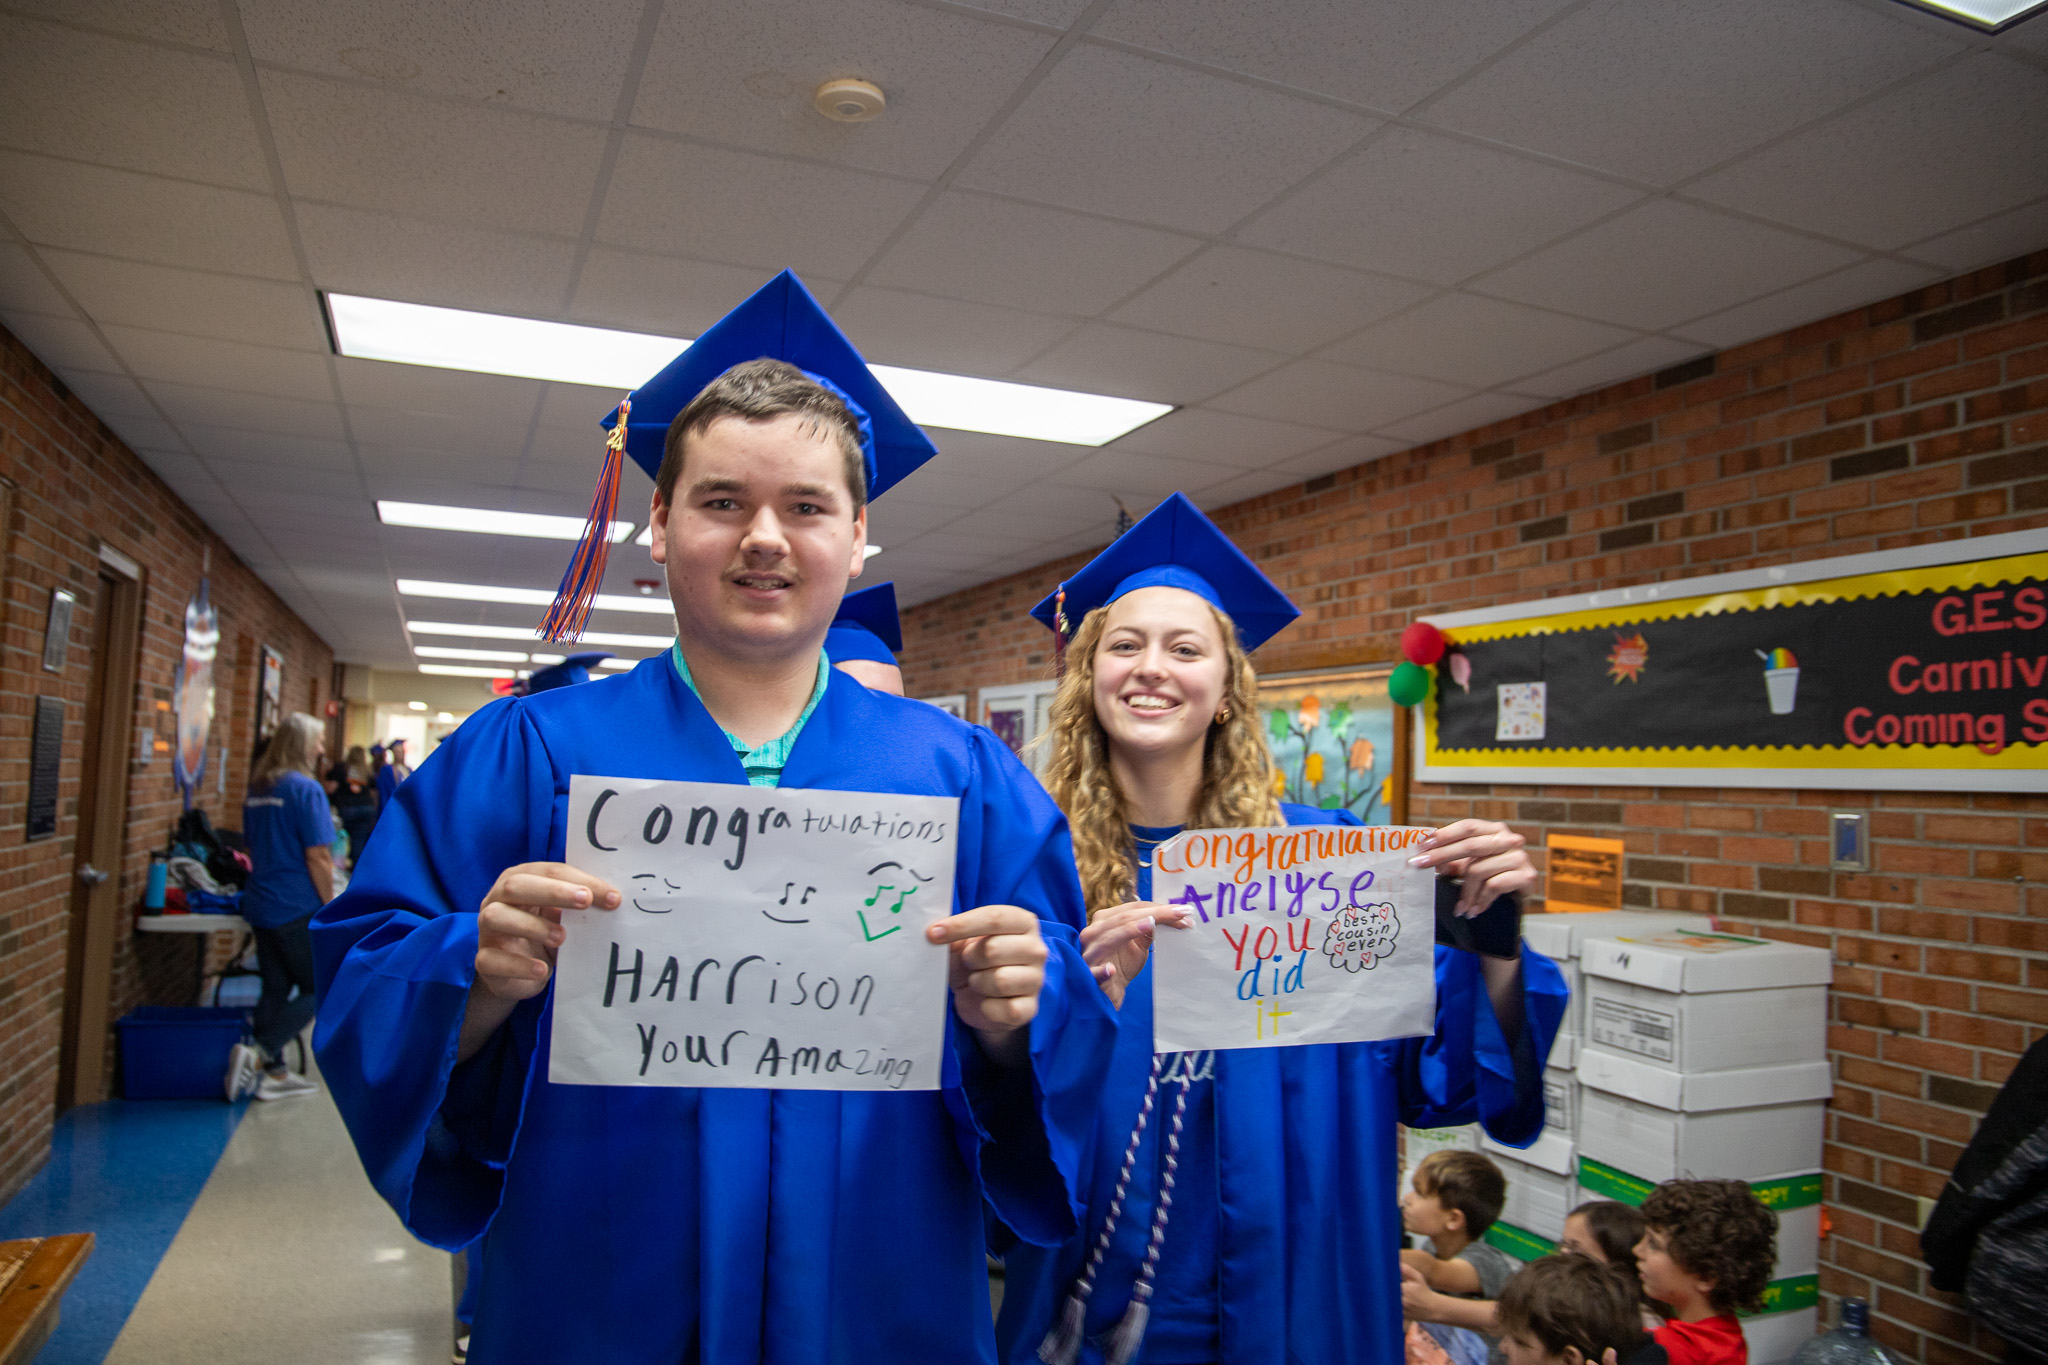 image of students in cap and gown holding signs